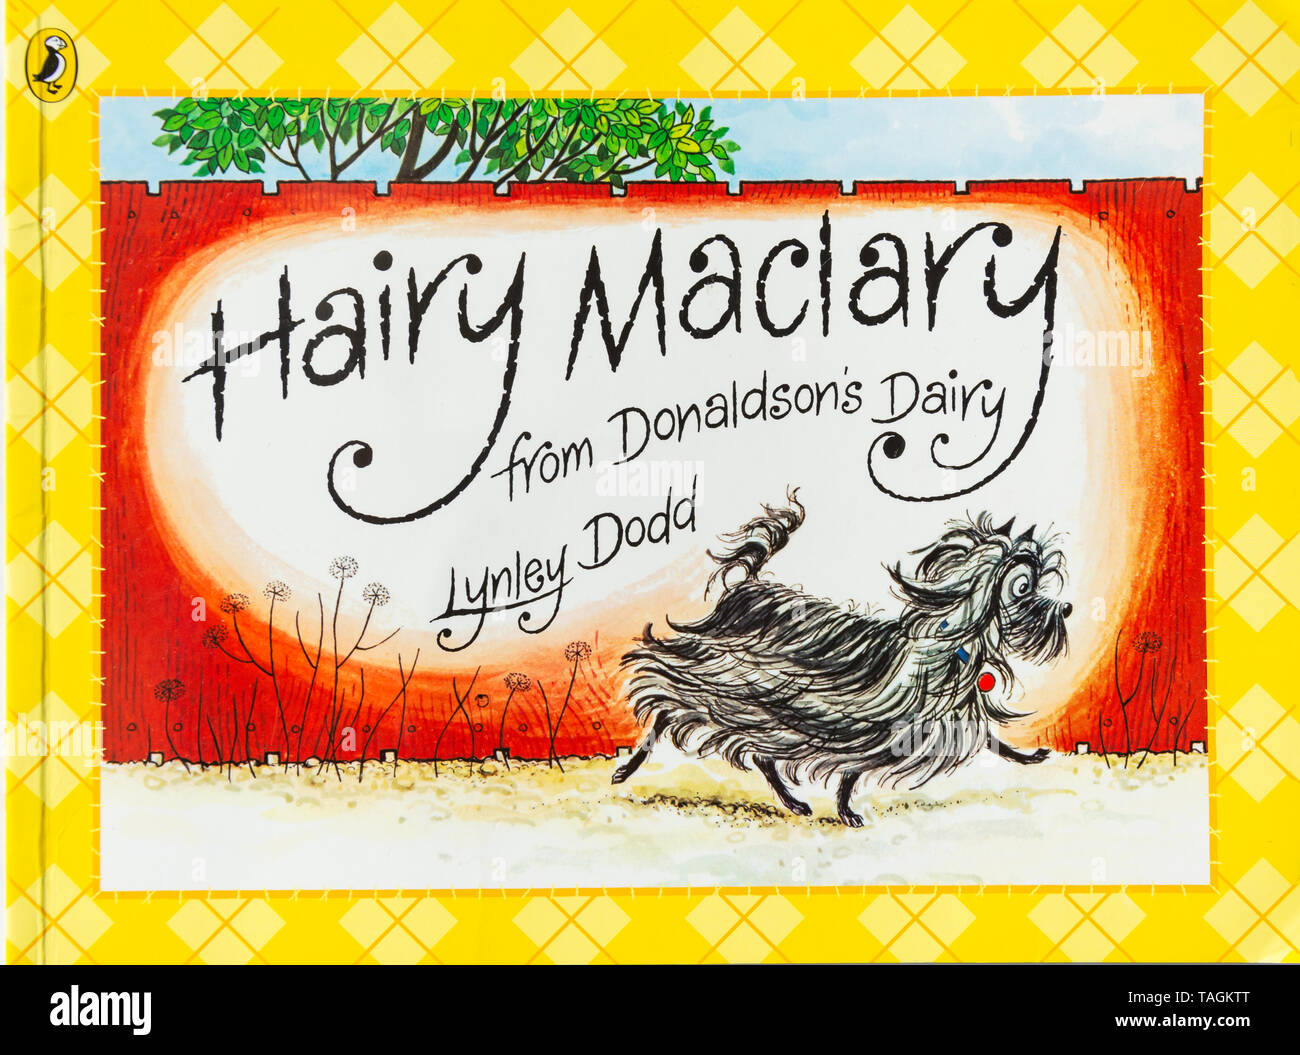 New Zealand children's book Hairy Maclary from Donaldson's Dairy by Lynley Dodd, Christchurch, Canterbury Region, New Zealand Stock Photo